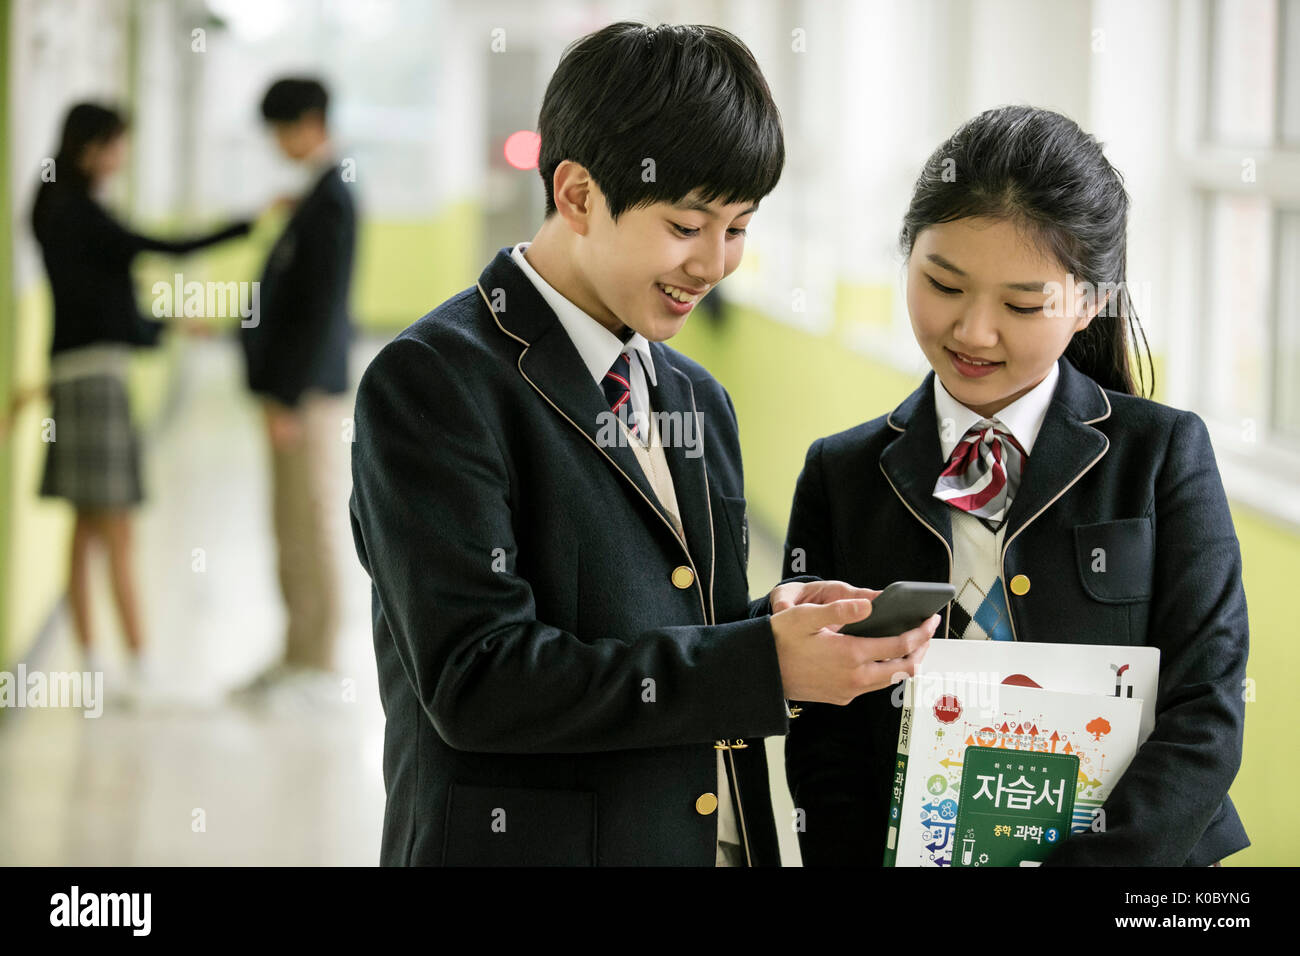 Smiling school boy and school girl sharing a smartphone Stock Photo